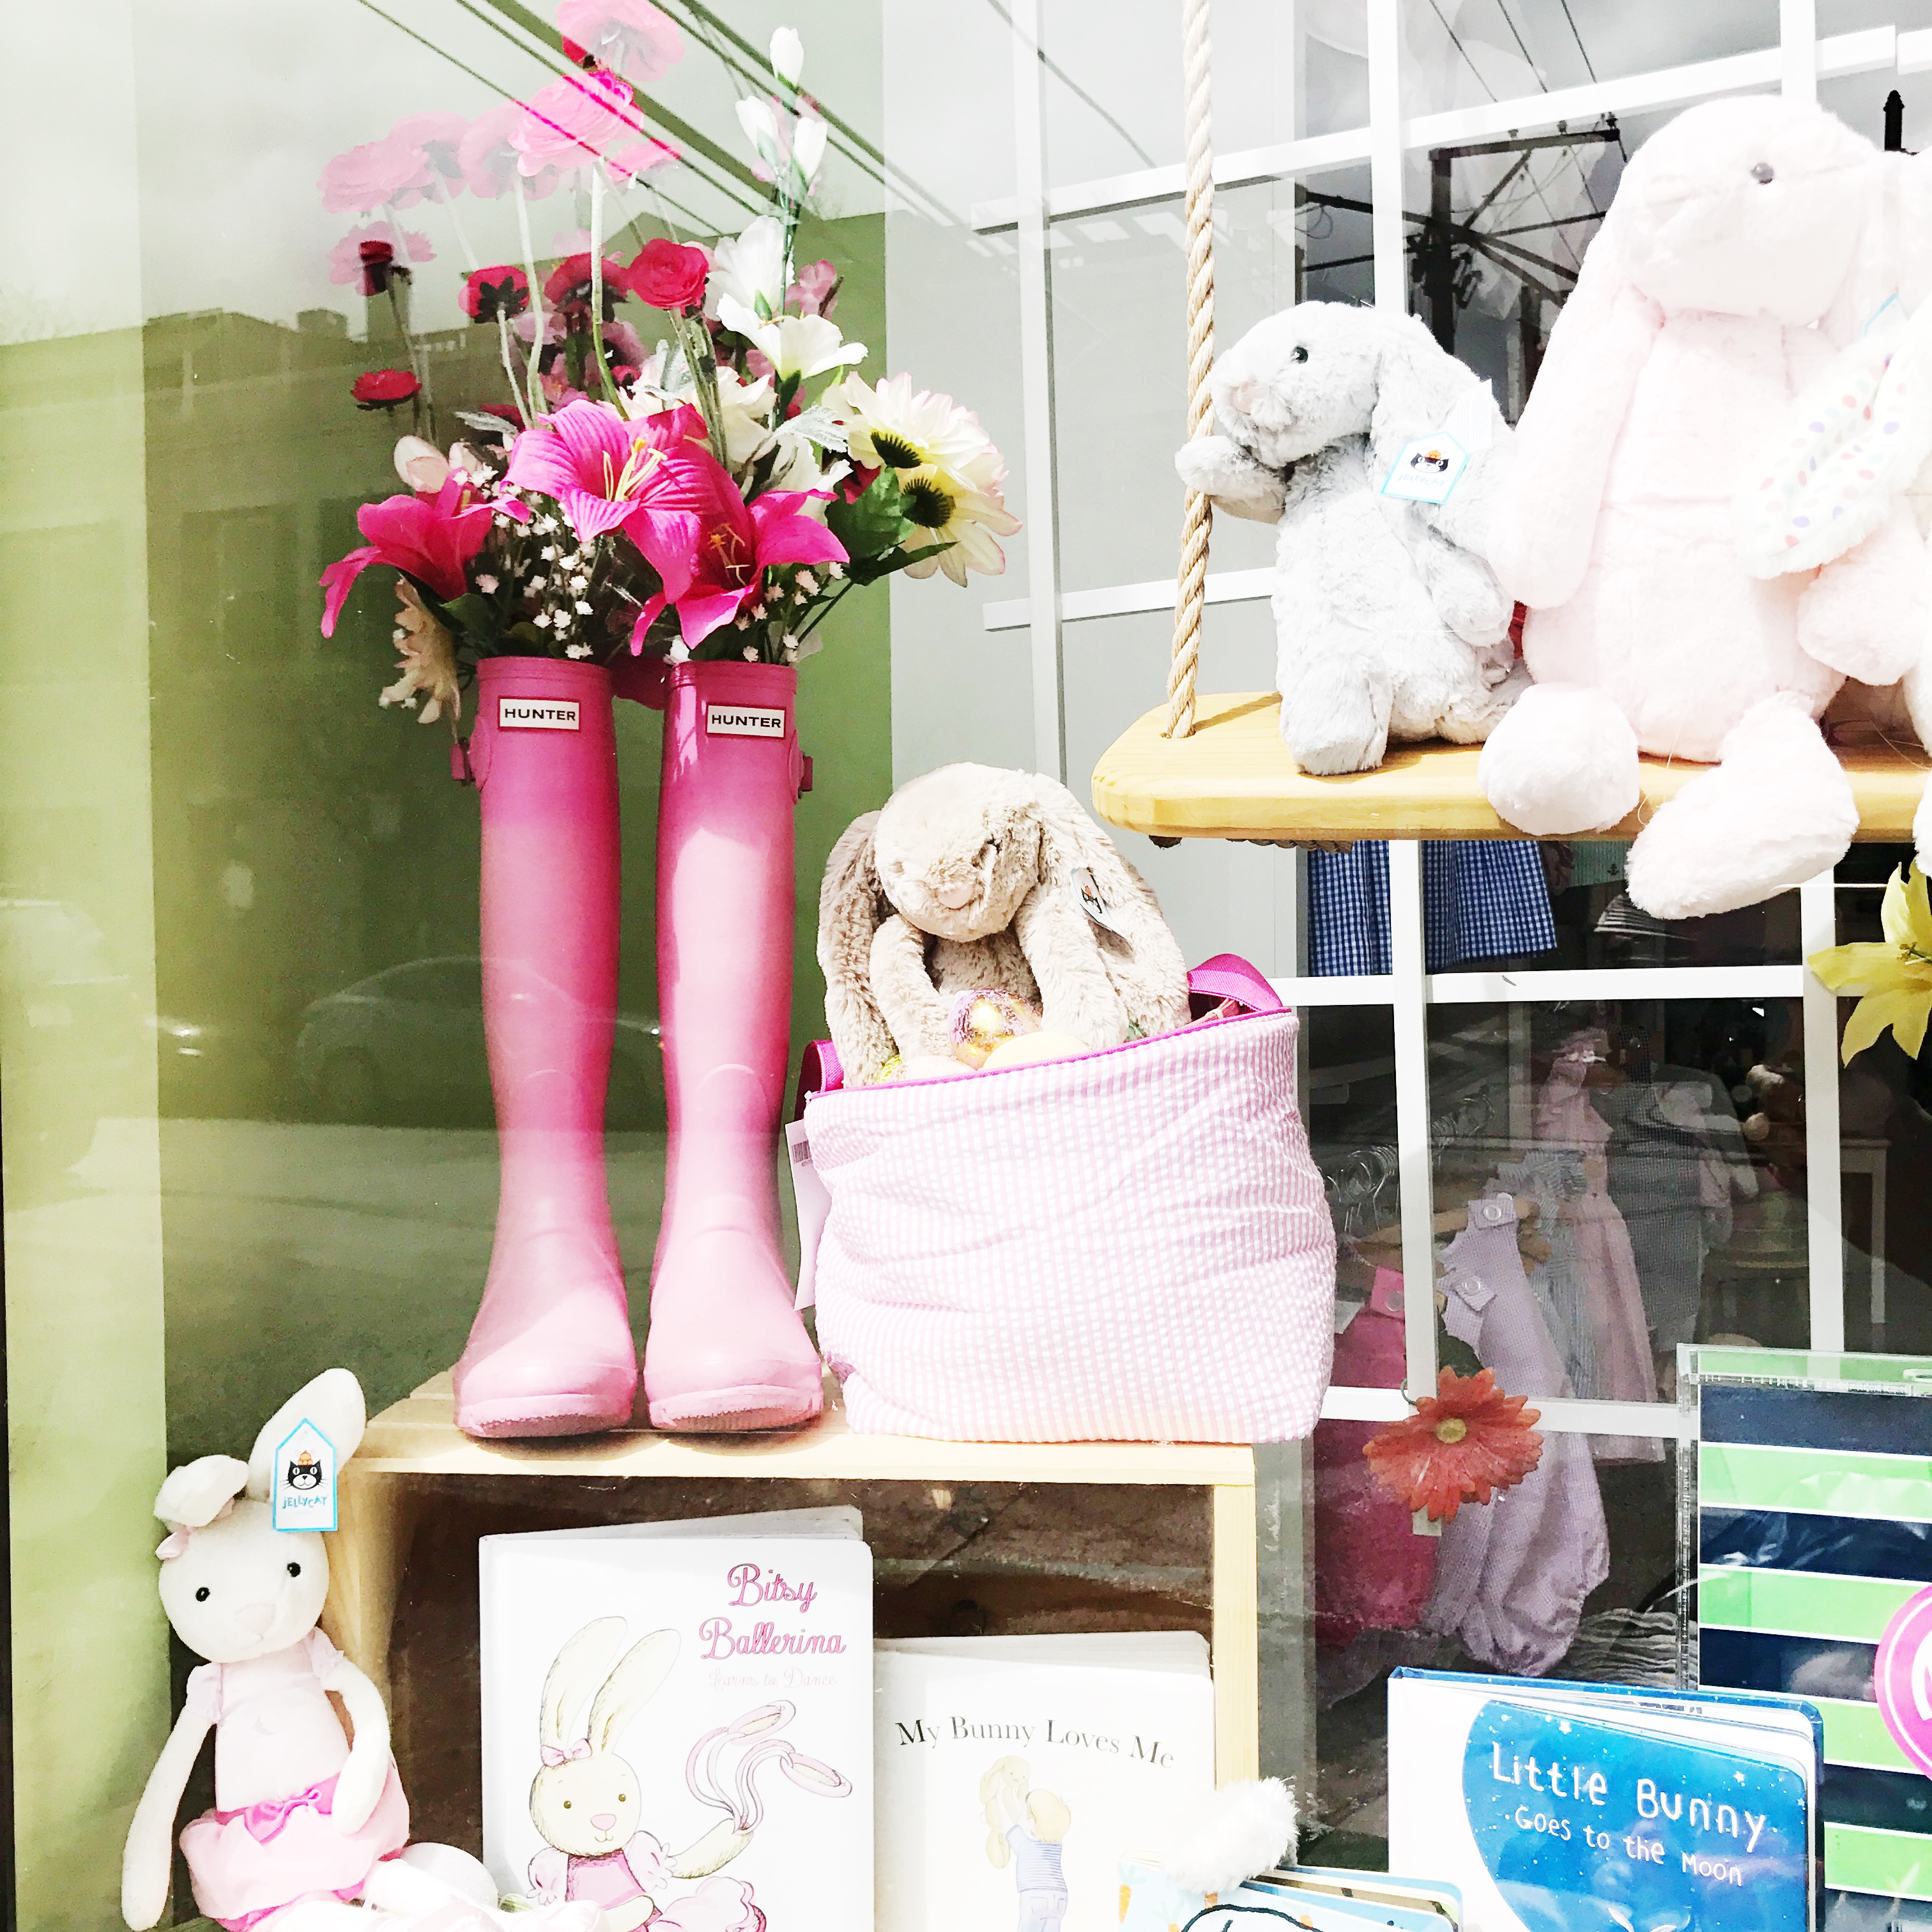 Monograms on Webster has been killin' it with their window displays lately. So sweet!